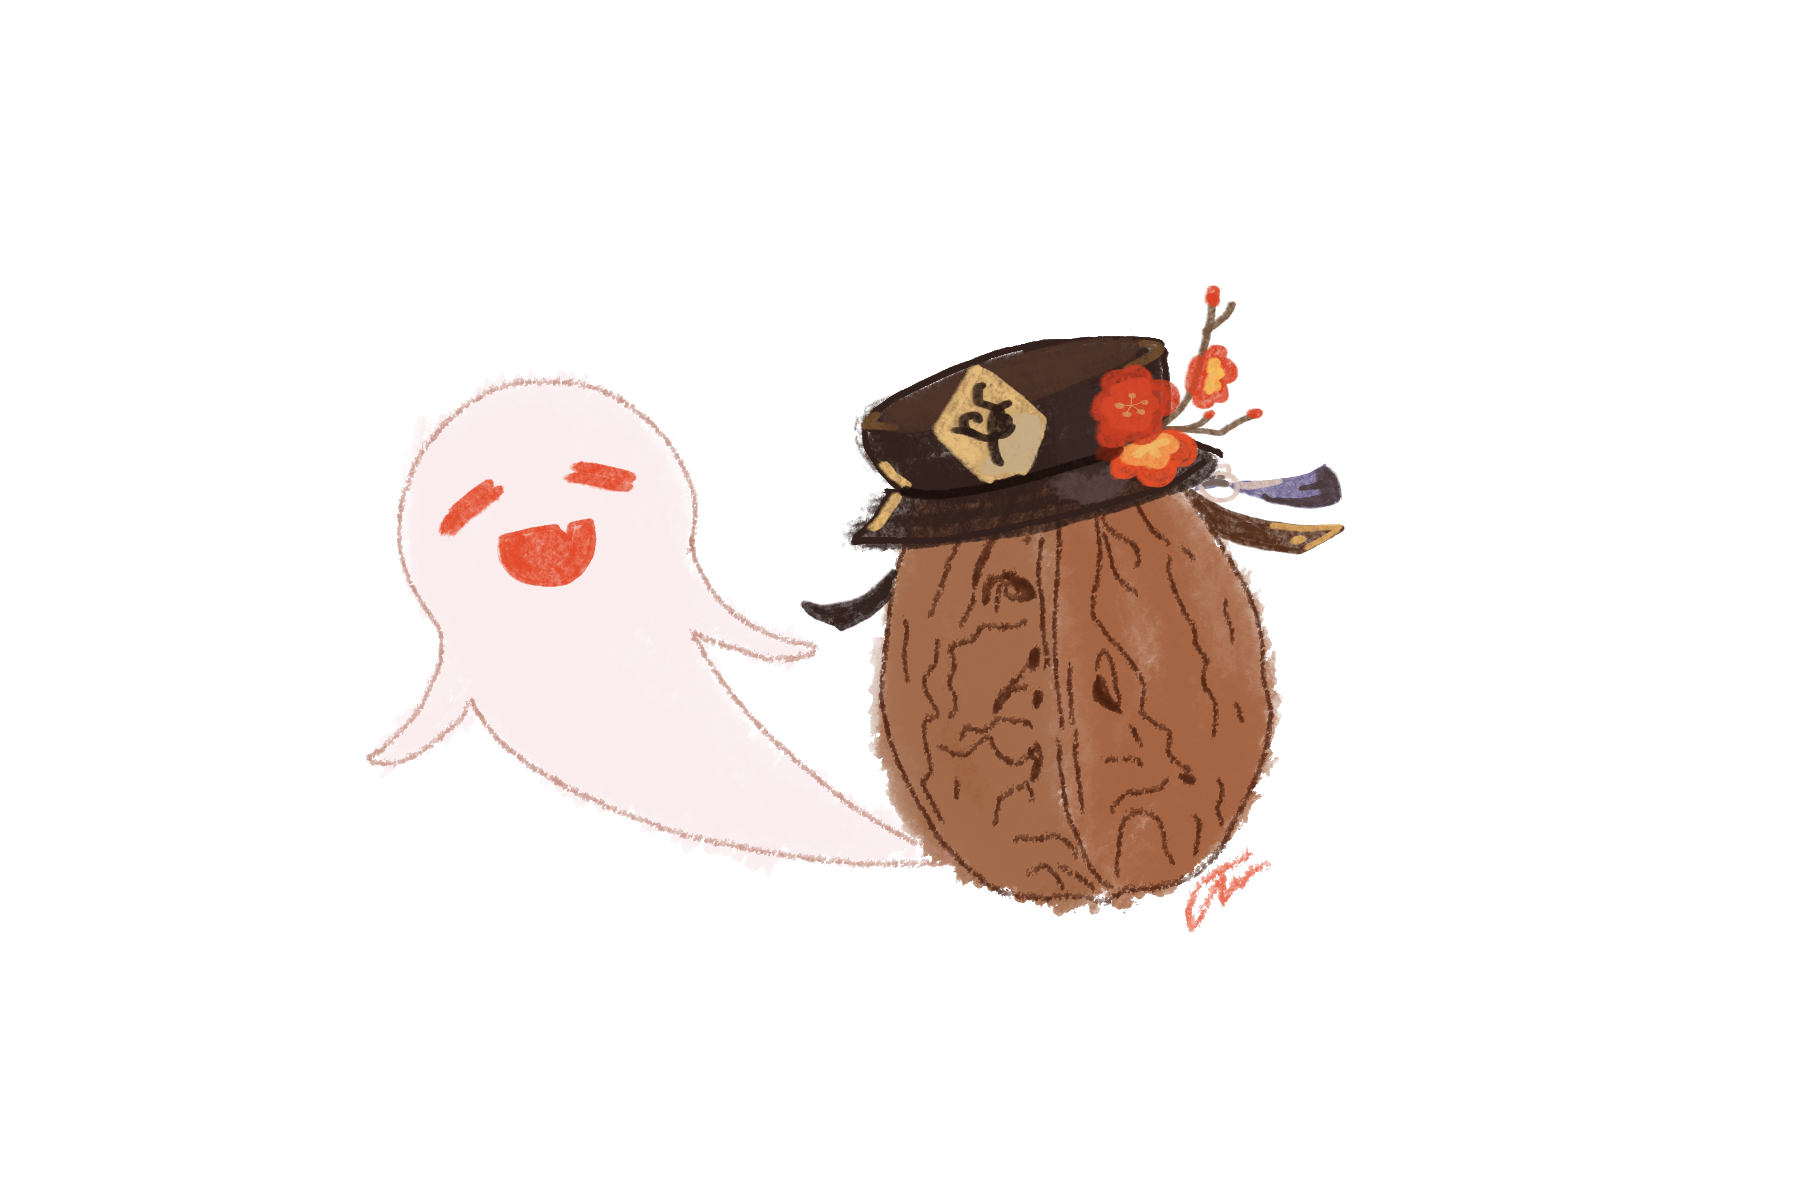 Here's the GIF for pet the walnut. Use it however you like. : r/HuTao_Mains